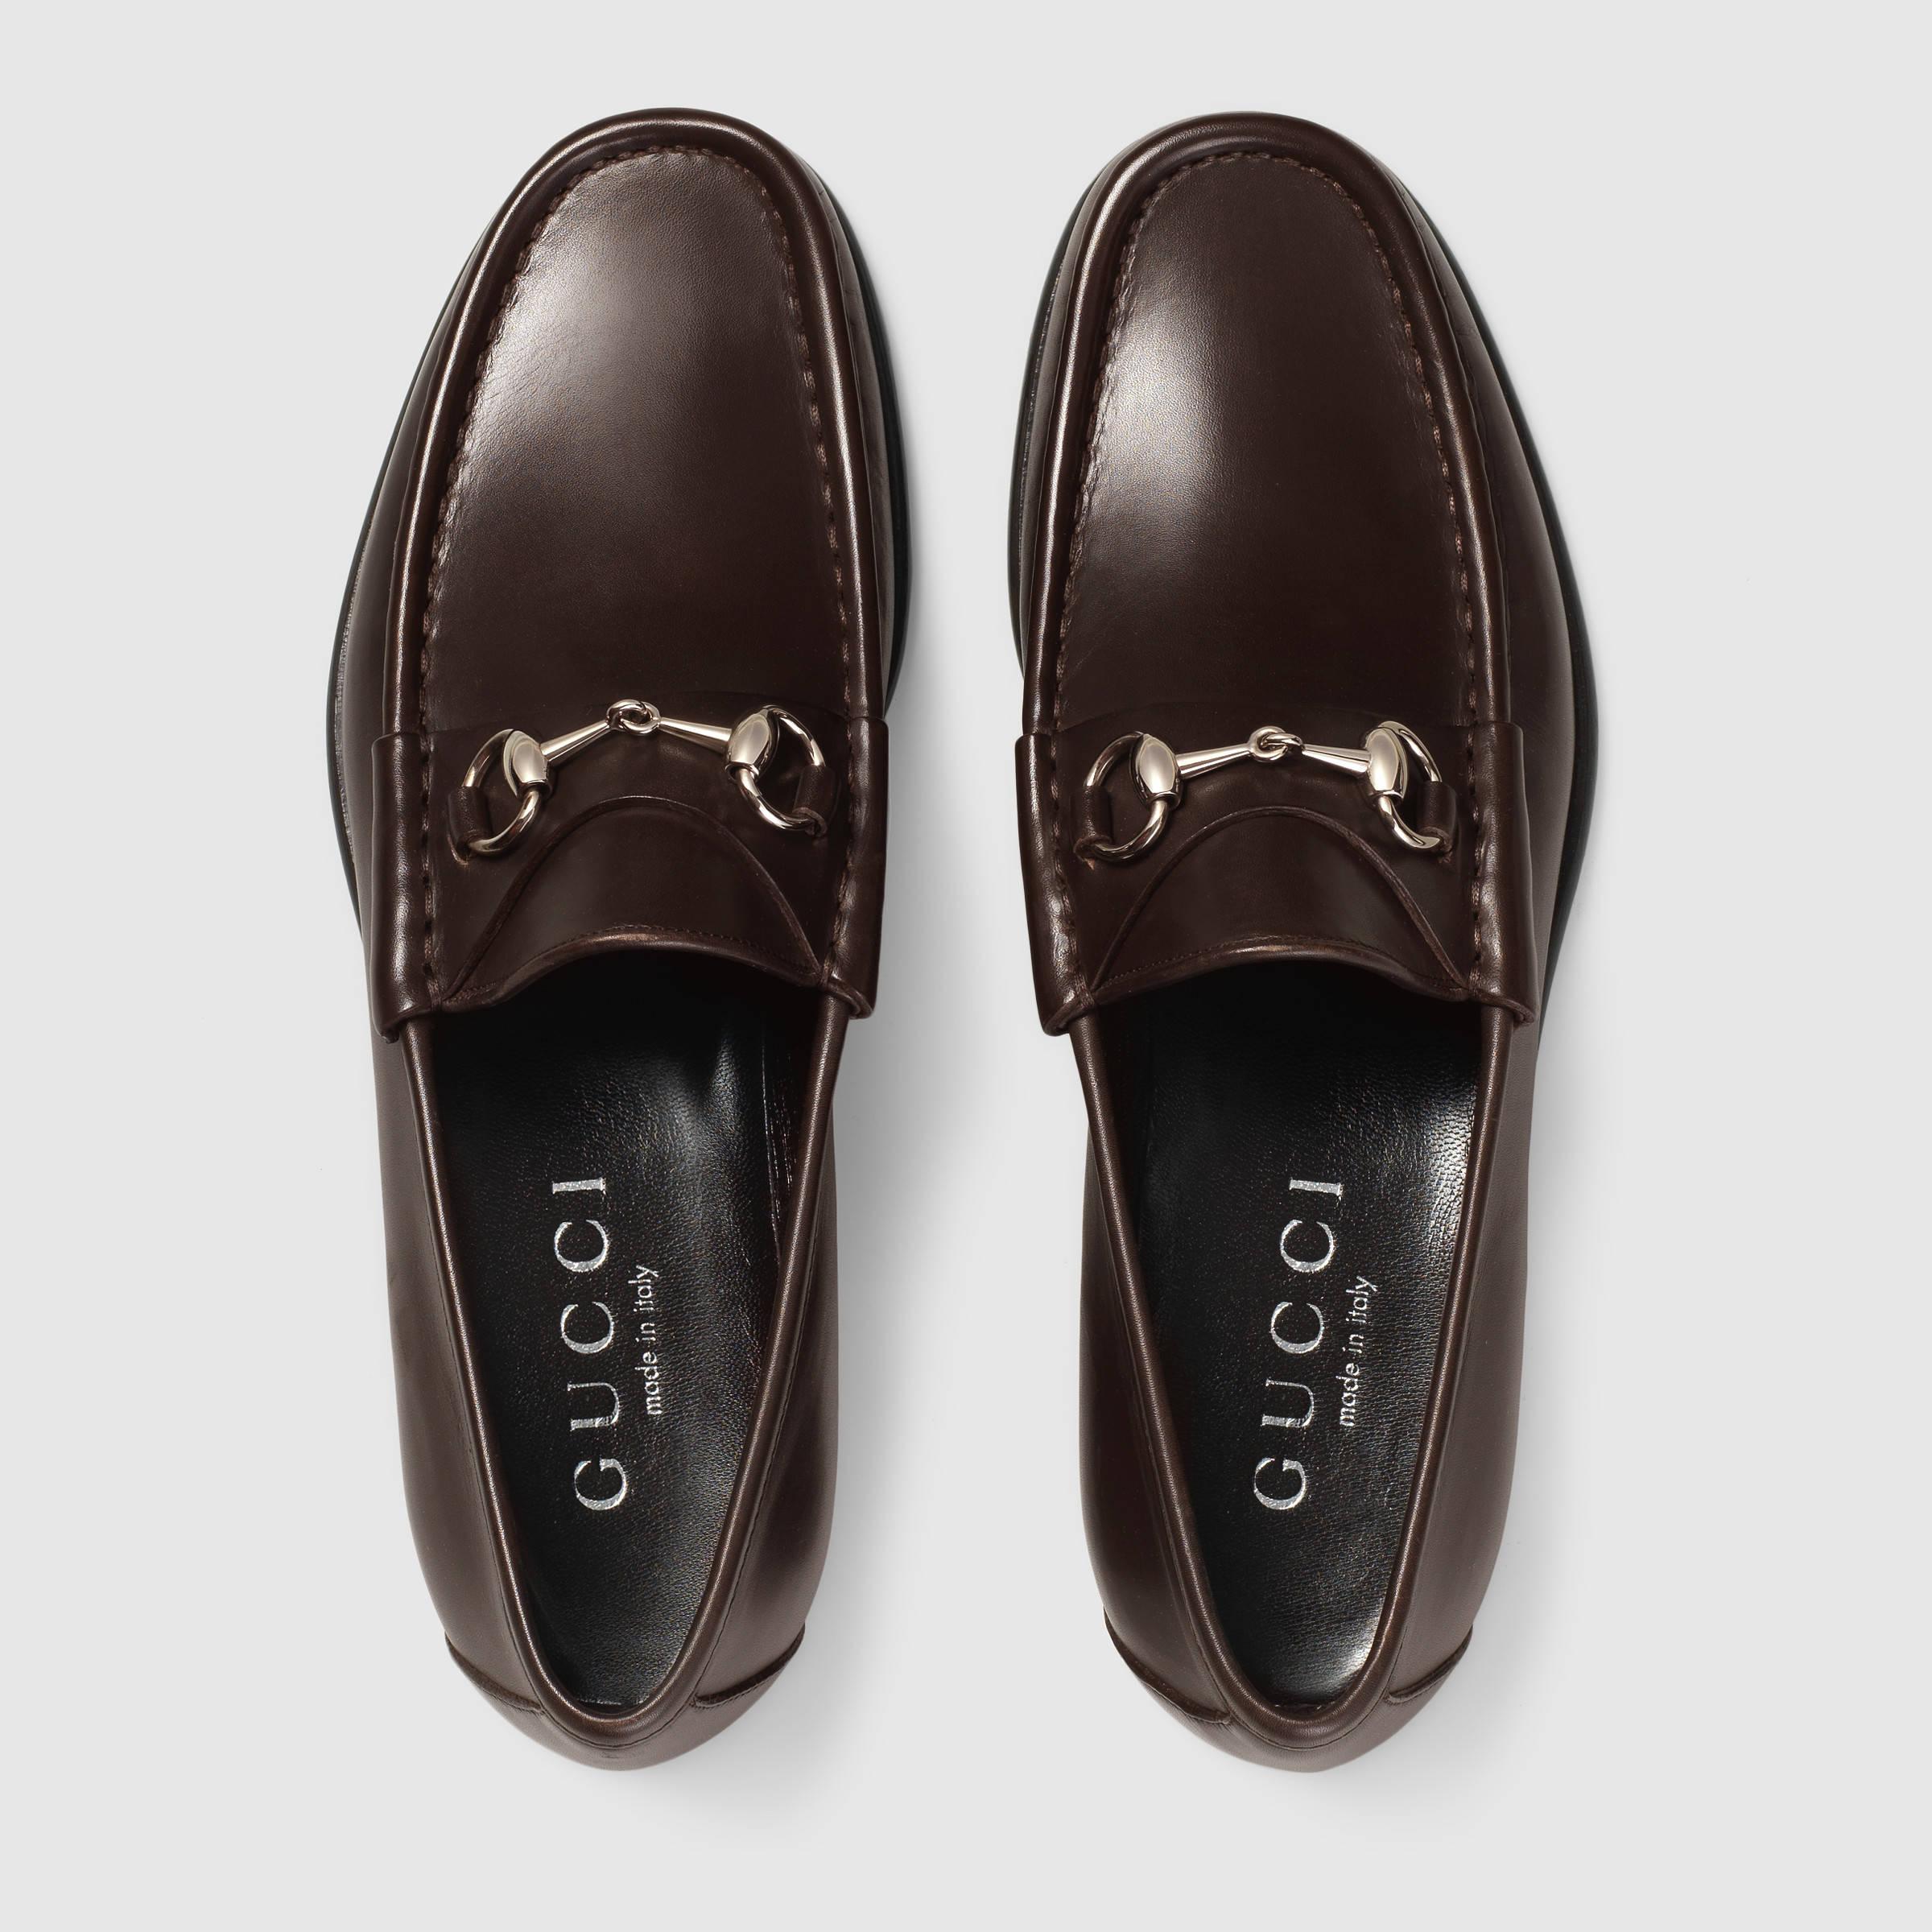 Gucci Horsebit Leather Loafer in Brown for Men - Lyst